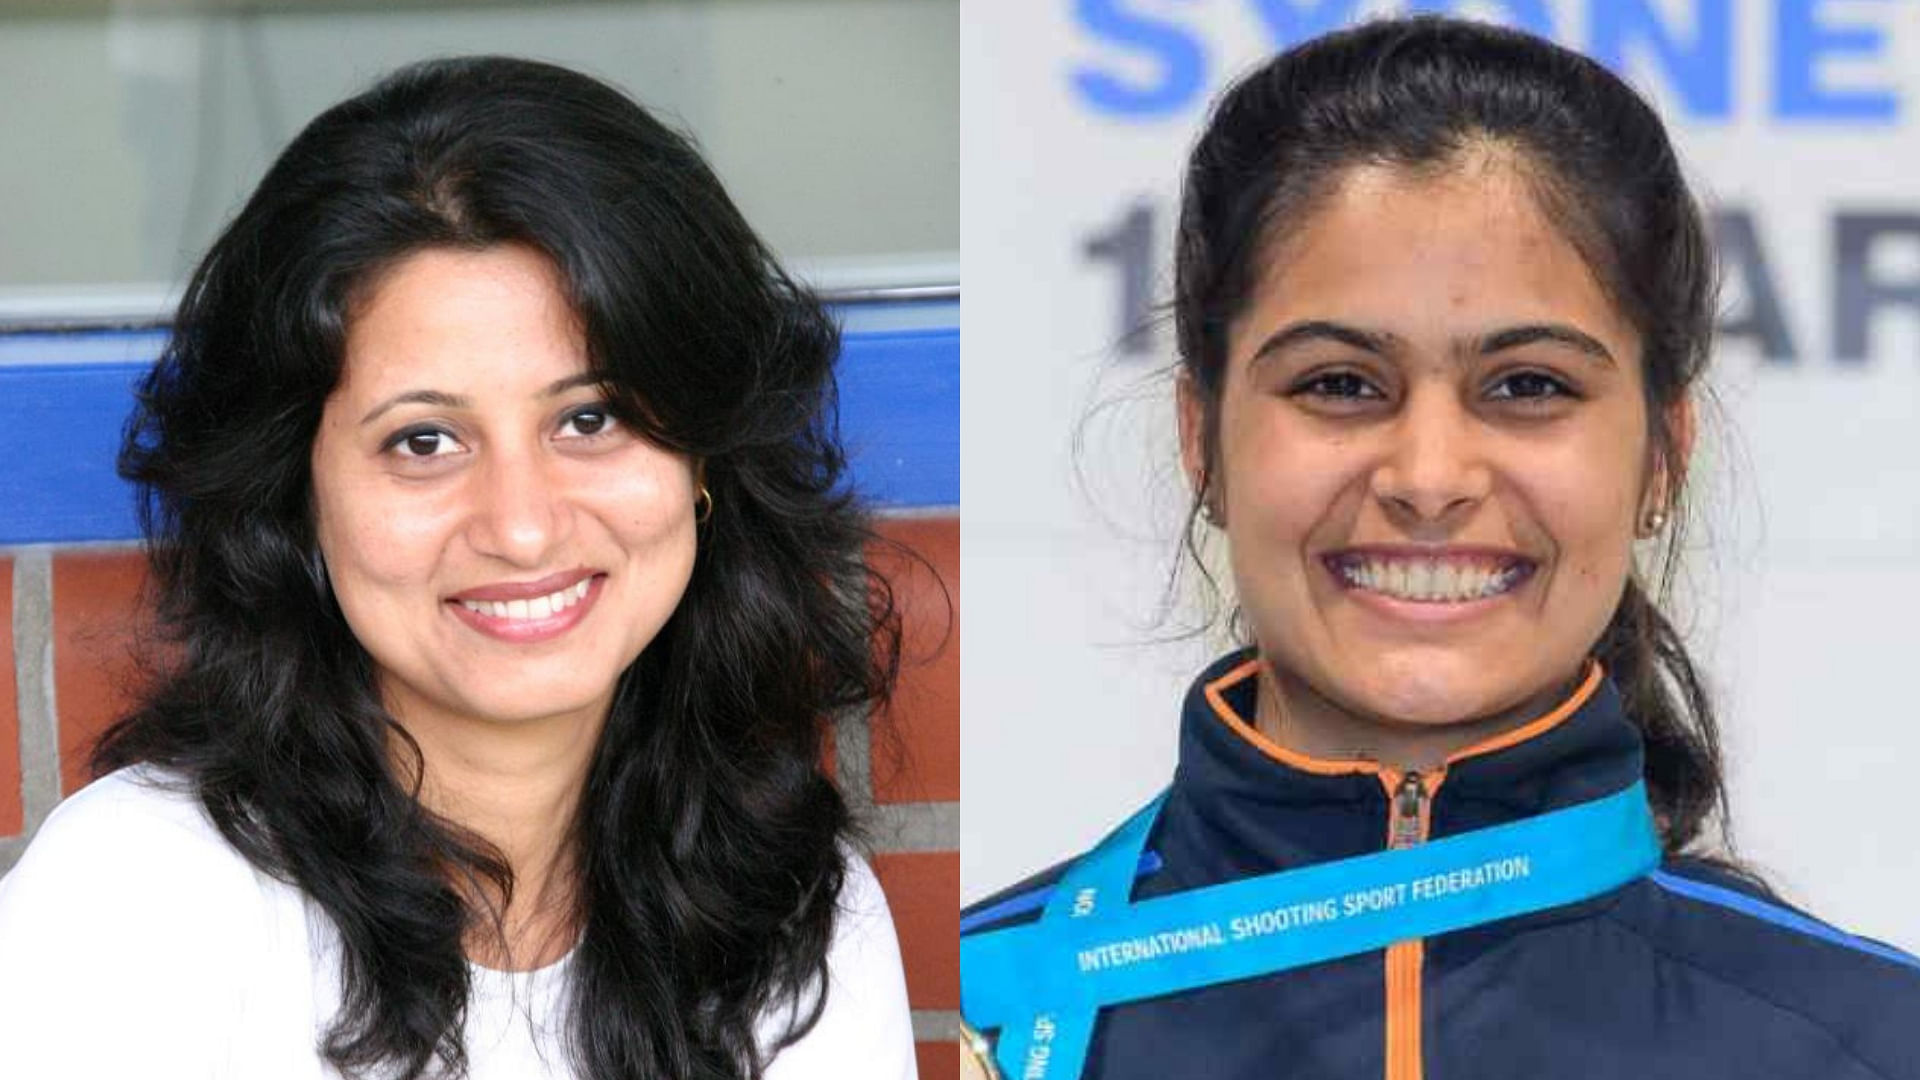 Former World no 1 shooter Anjali Bhagwat spoke out in support of Manu Bhaker.